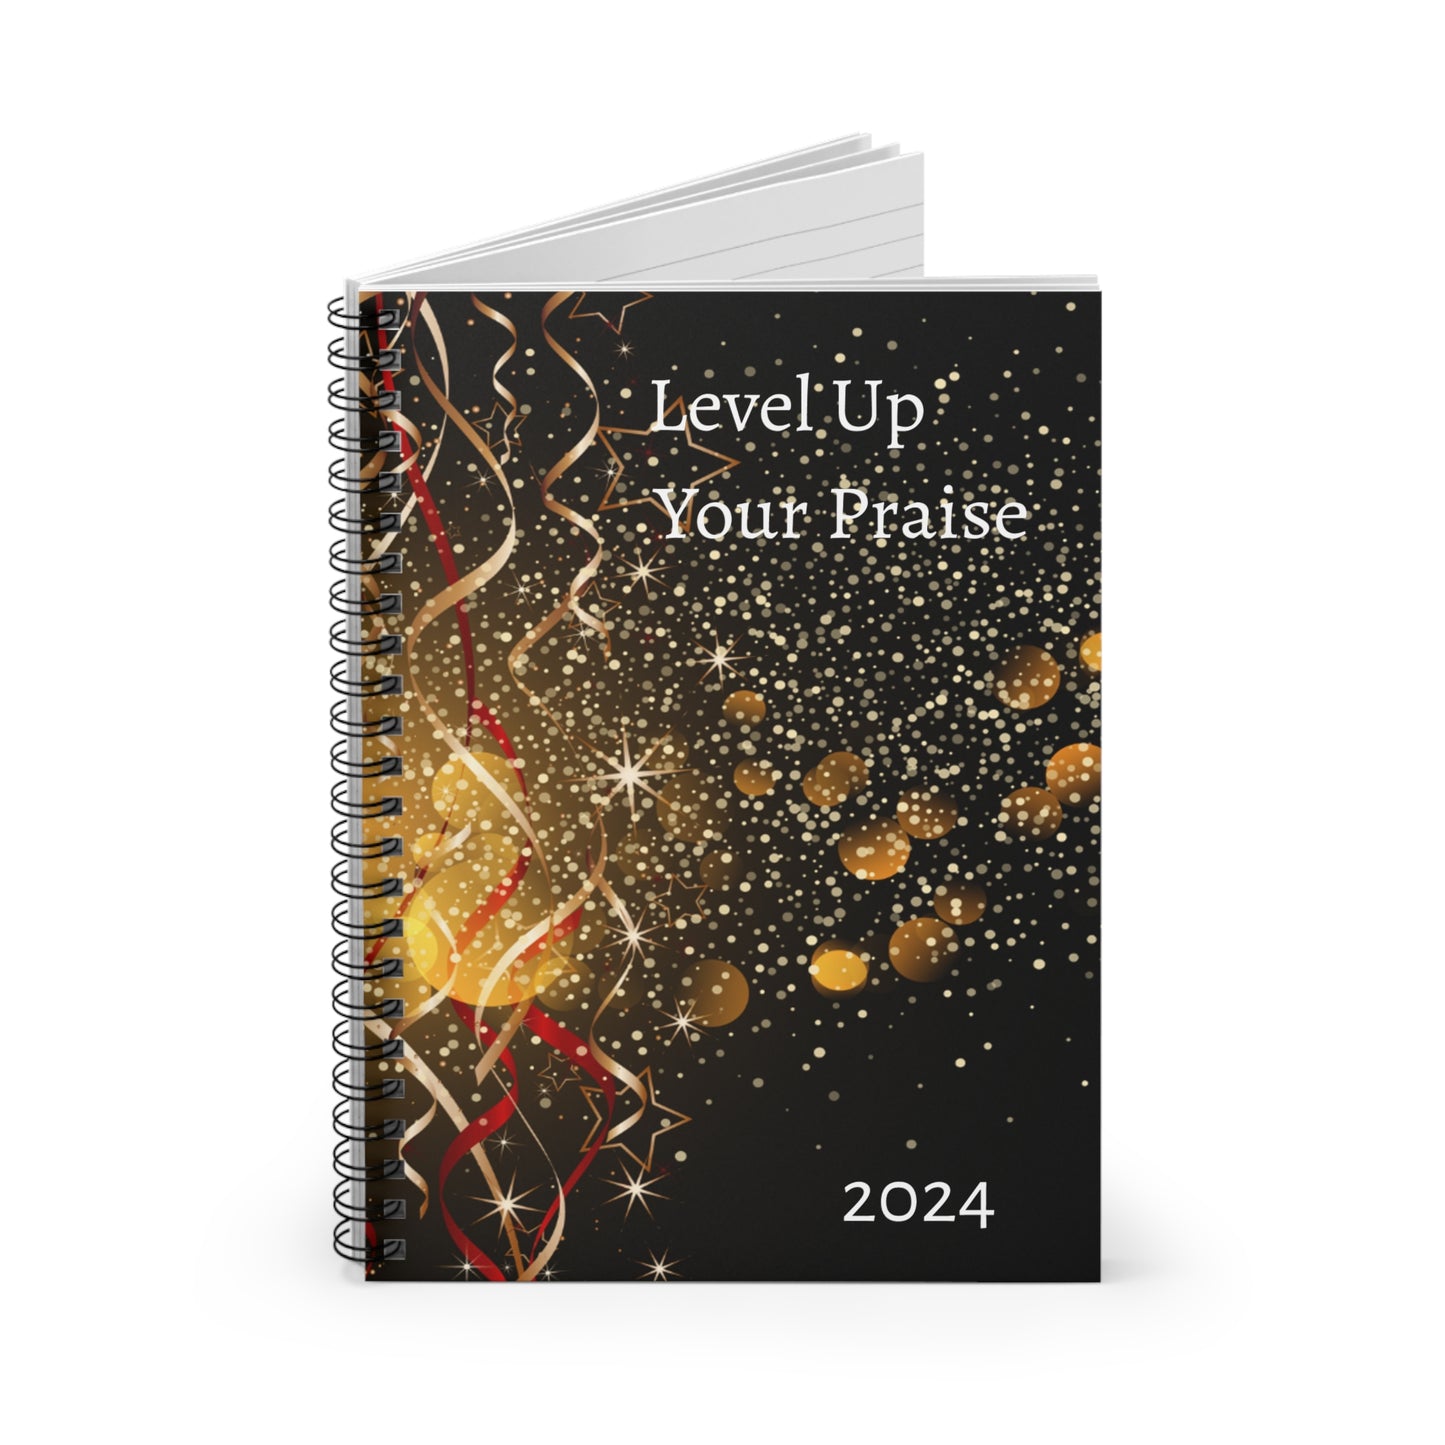 Level Up your Praise: Spiral Notebook - Ruled Line